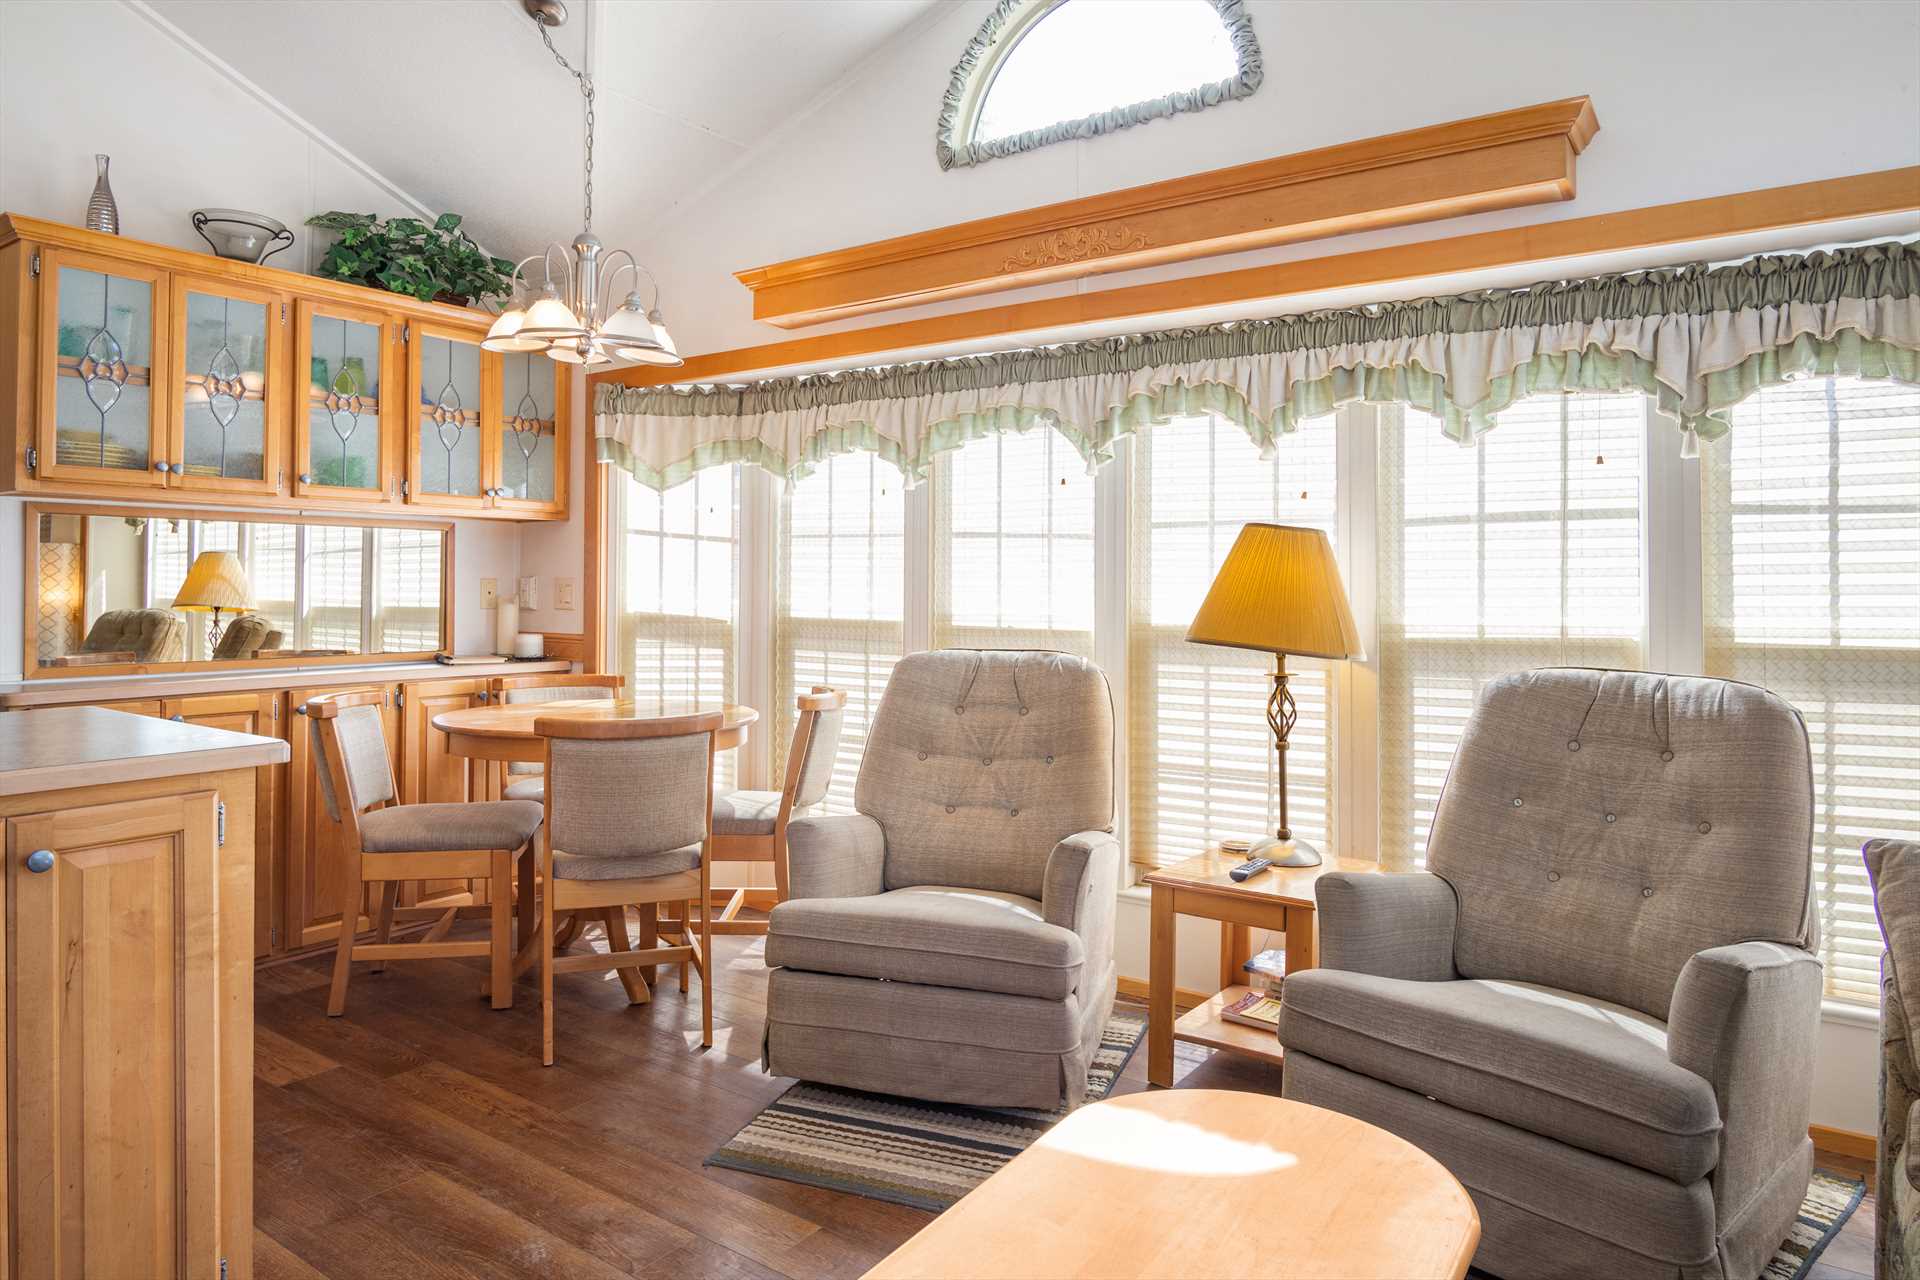                                                 The bright and cozy living room and dining area in the cabin make it just the right size for up to four guests!